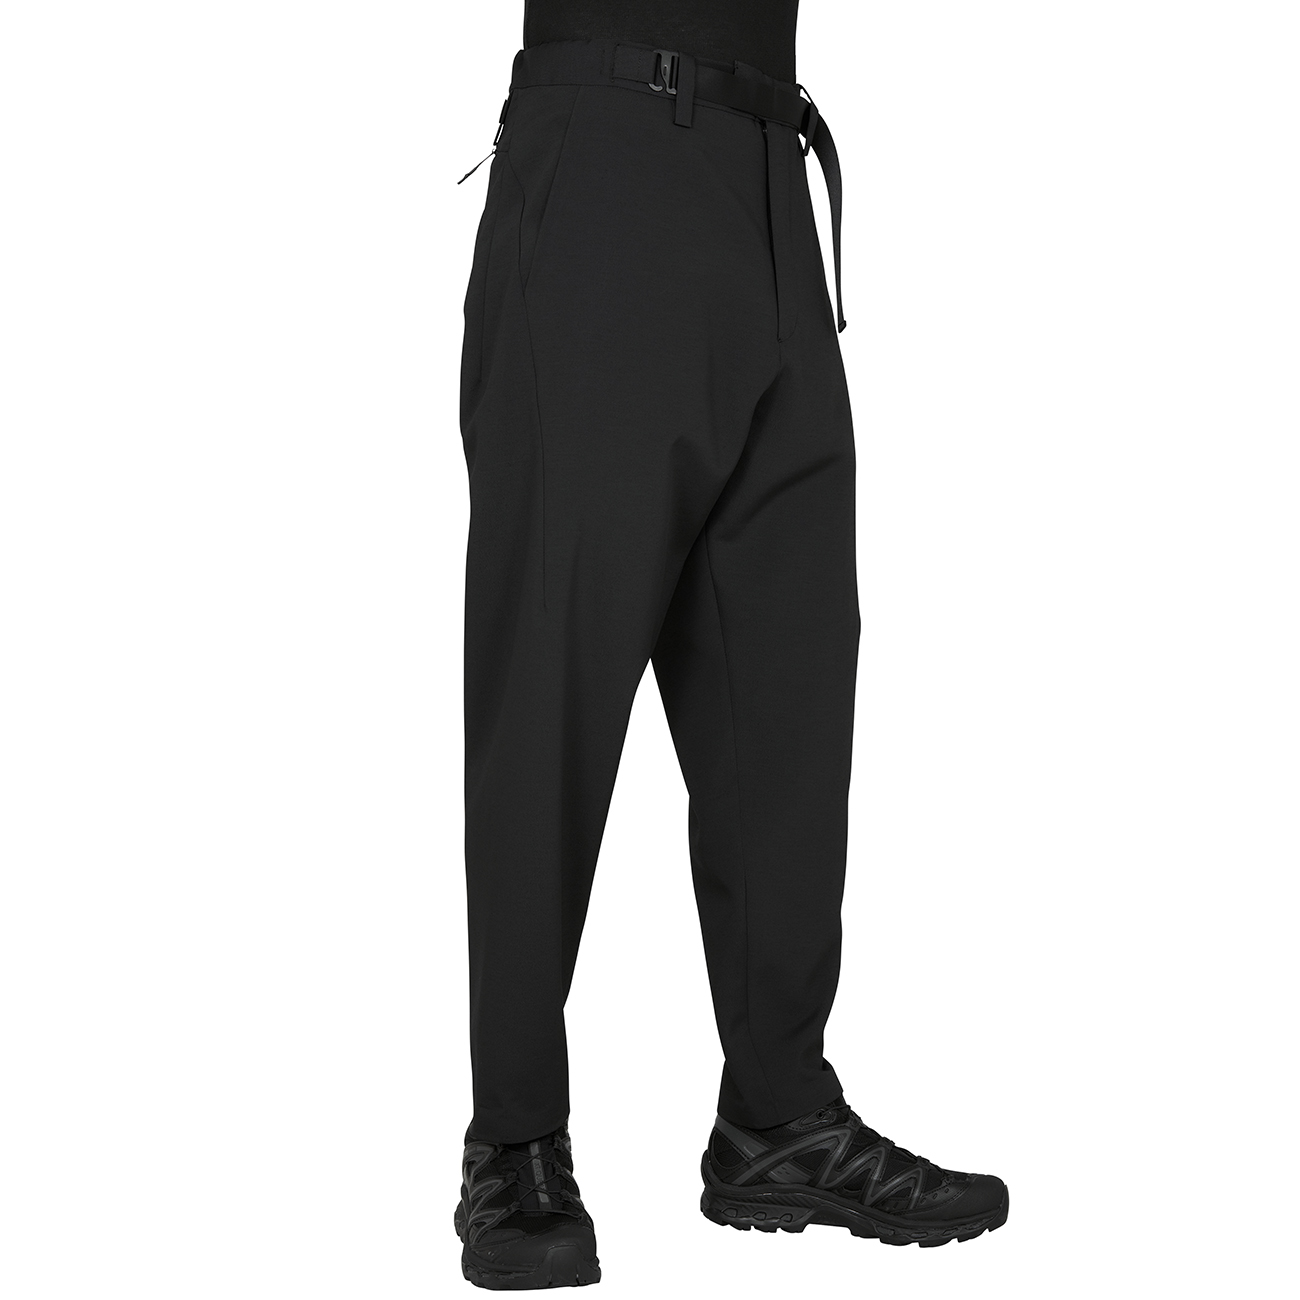 OX DARTED PANT BLACK